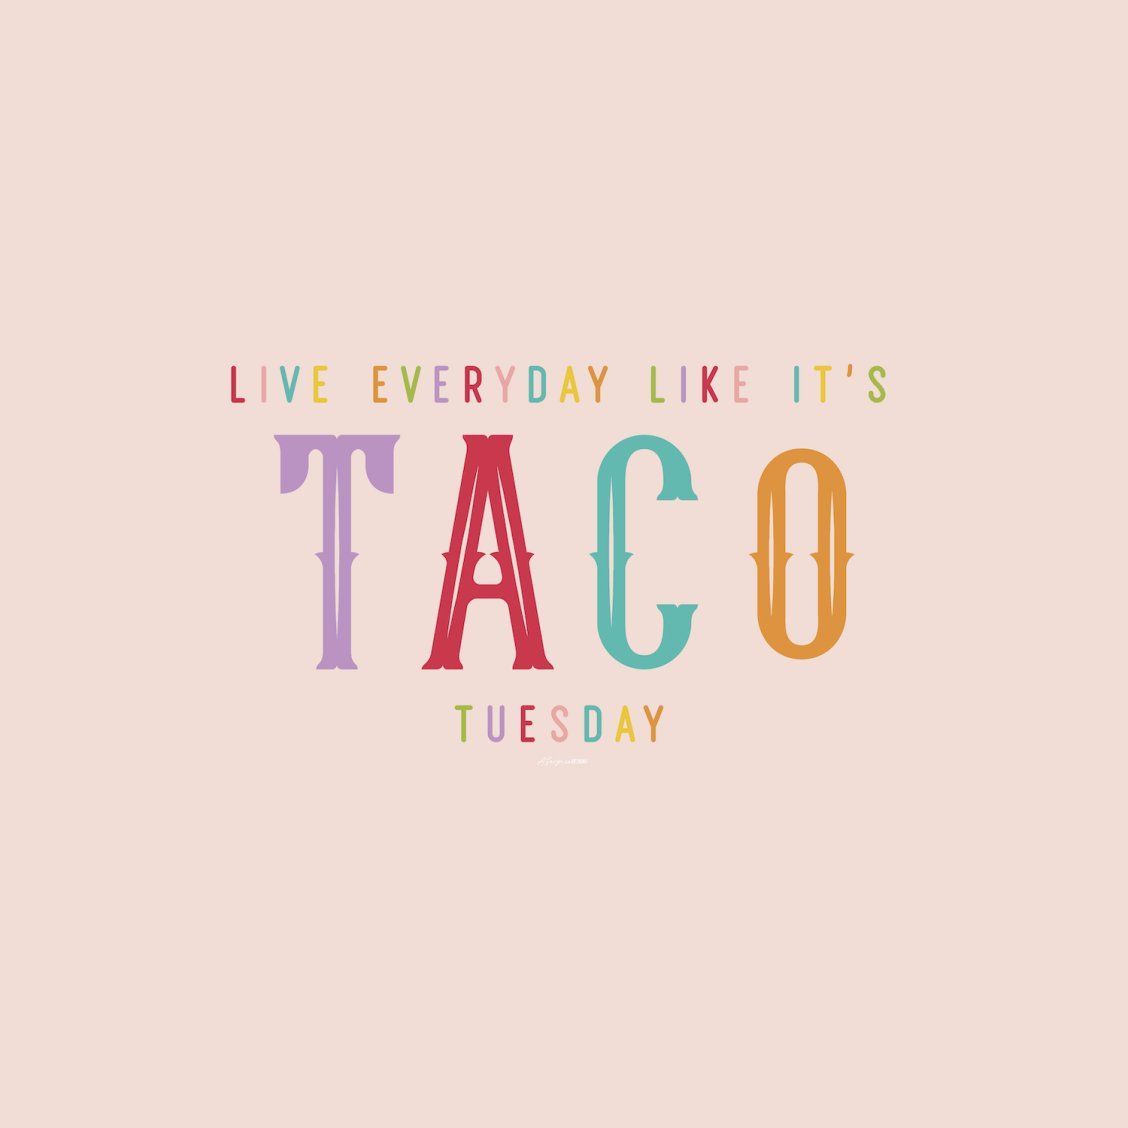 Taco Tuesday! Art by ASerpico Designs on Society6. Taco tuesday, Taco humor, Taco tuesdays humor